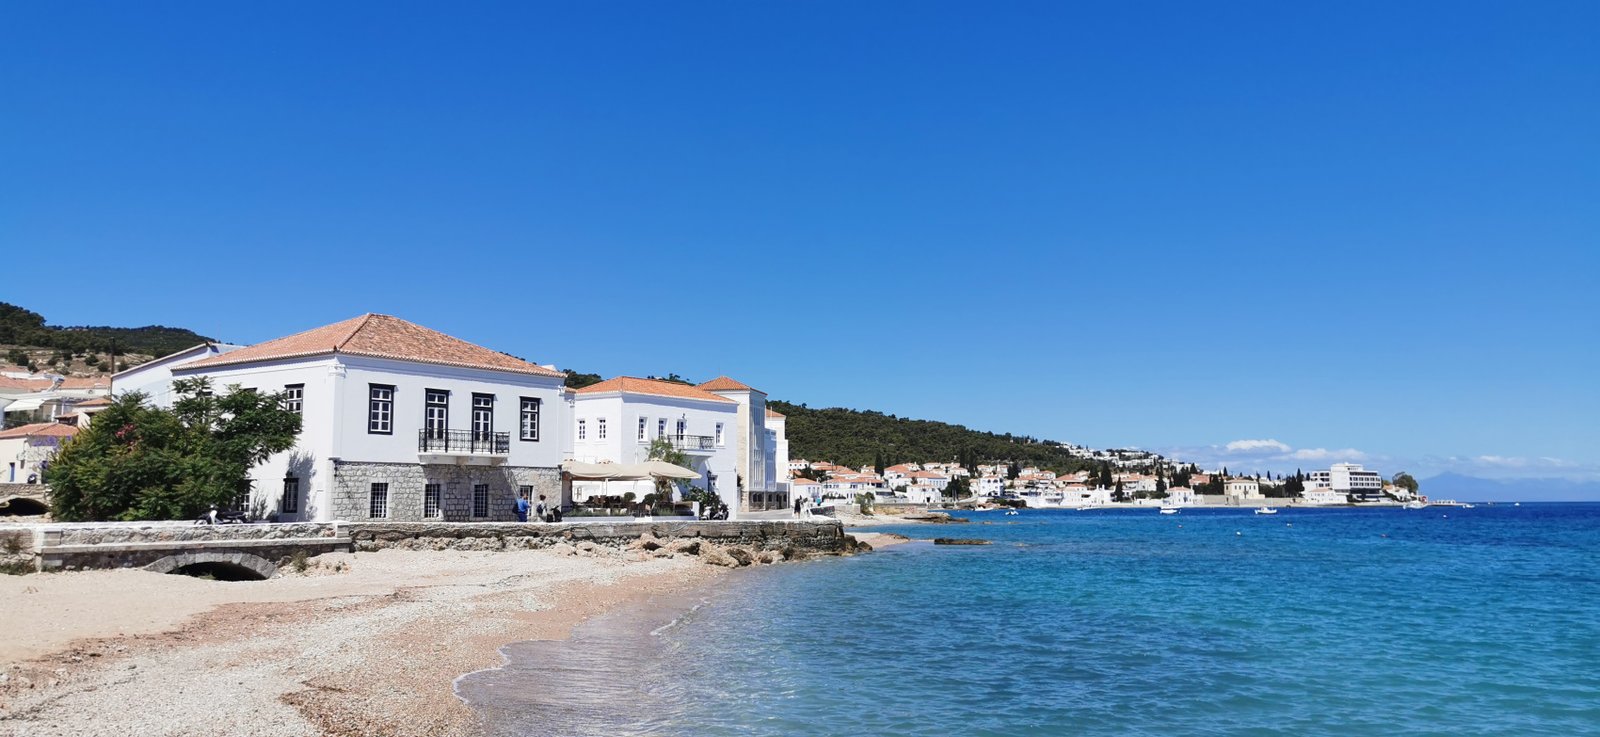 House by the sandy beach in Spetses Island